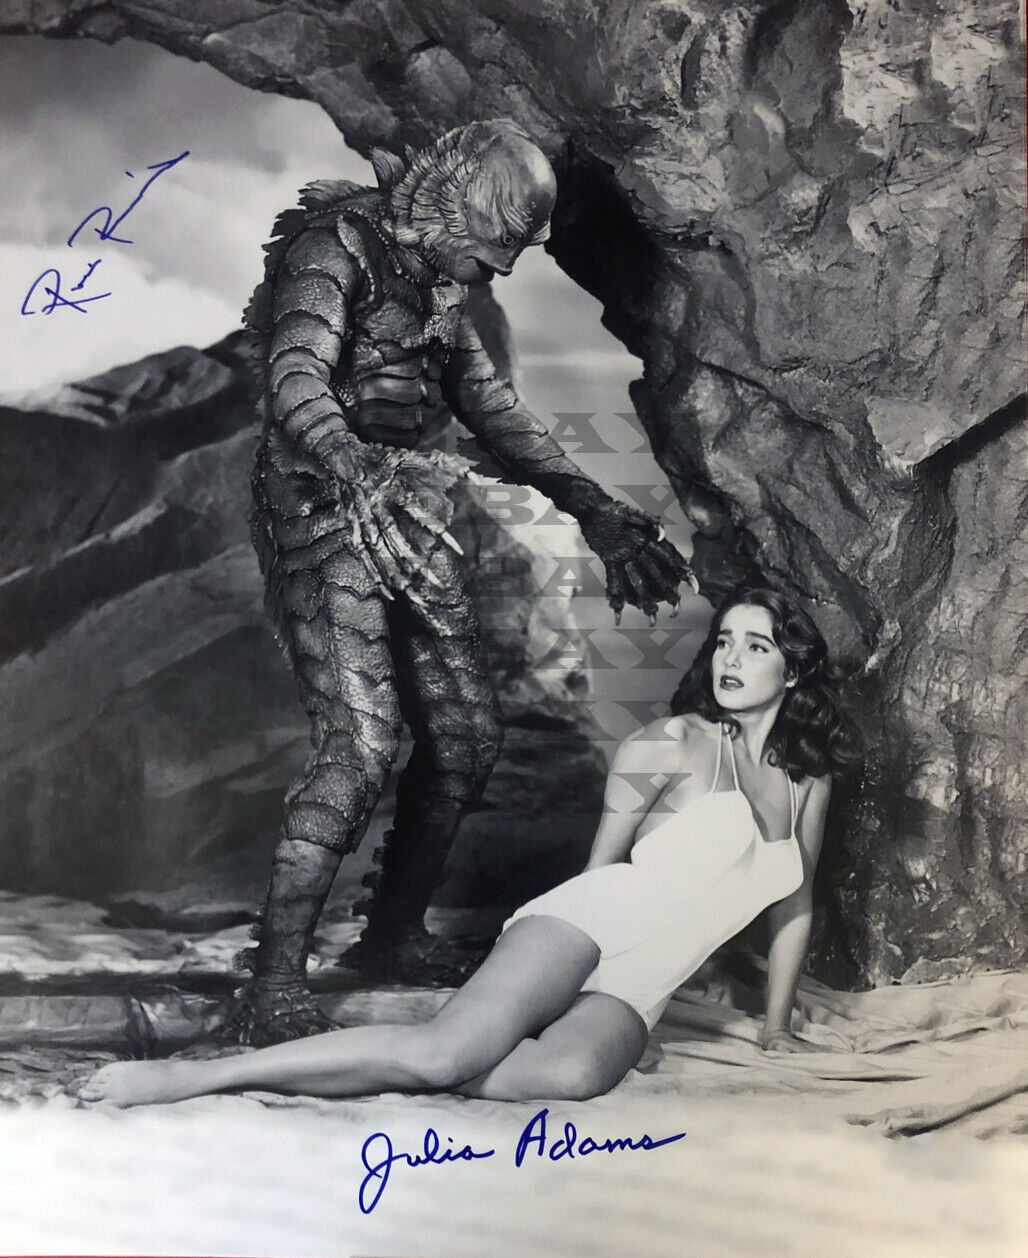 Ricou Browning Julie Adams Creature from the Black LagSigned 8x10 Photo Poster painting Reprint